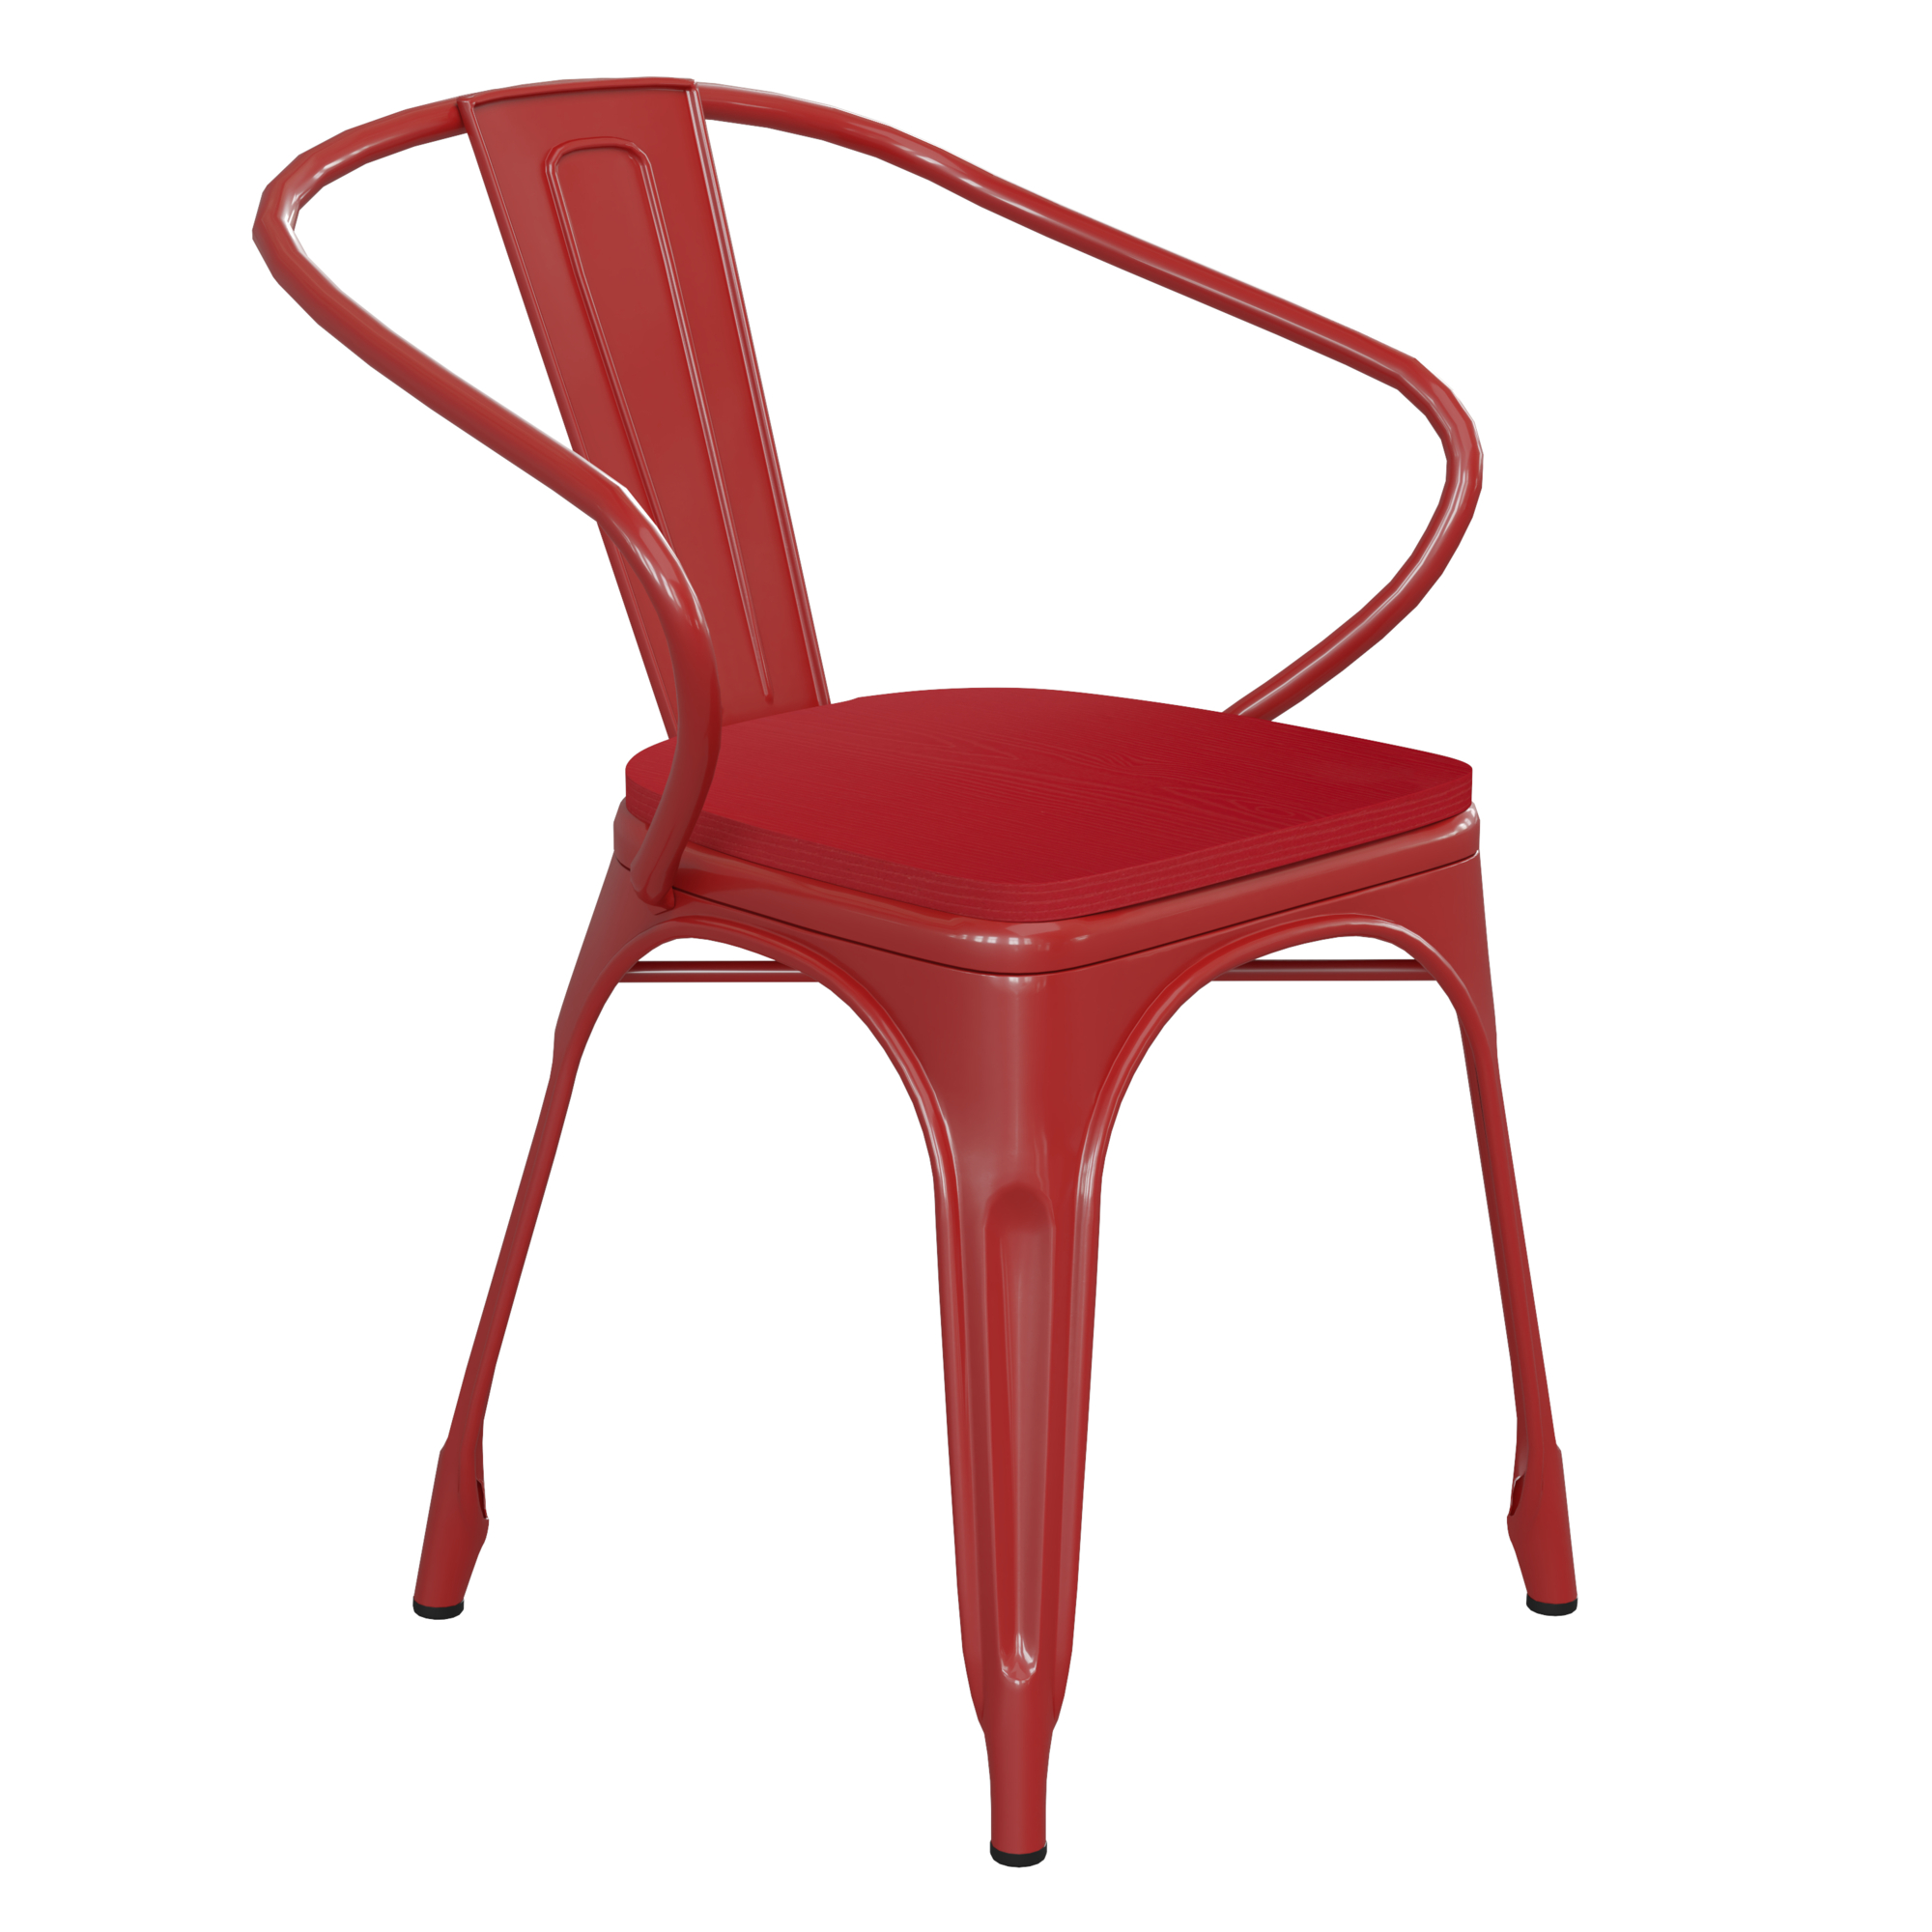 Flash Furniture, Red Metal Stack Chair with Red Poly Resin Seat, Primary Color Red, Included (qty.) 1, Model CH31270REDPL1R